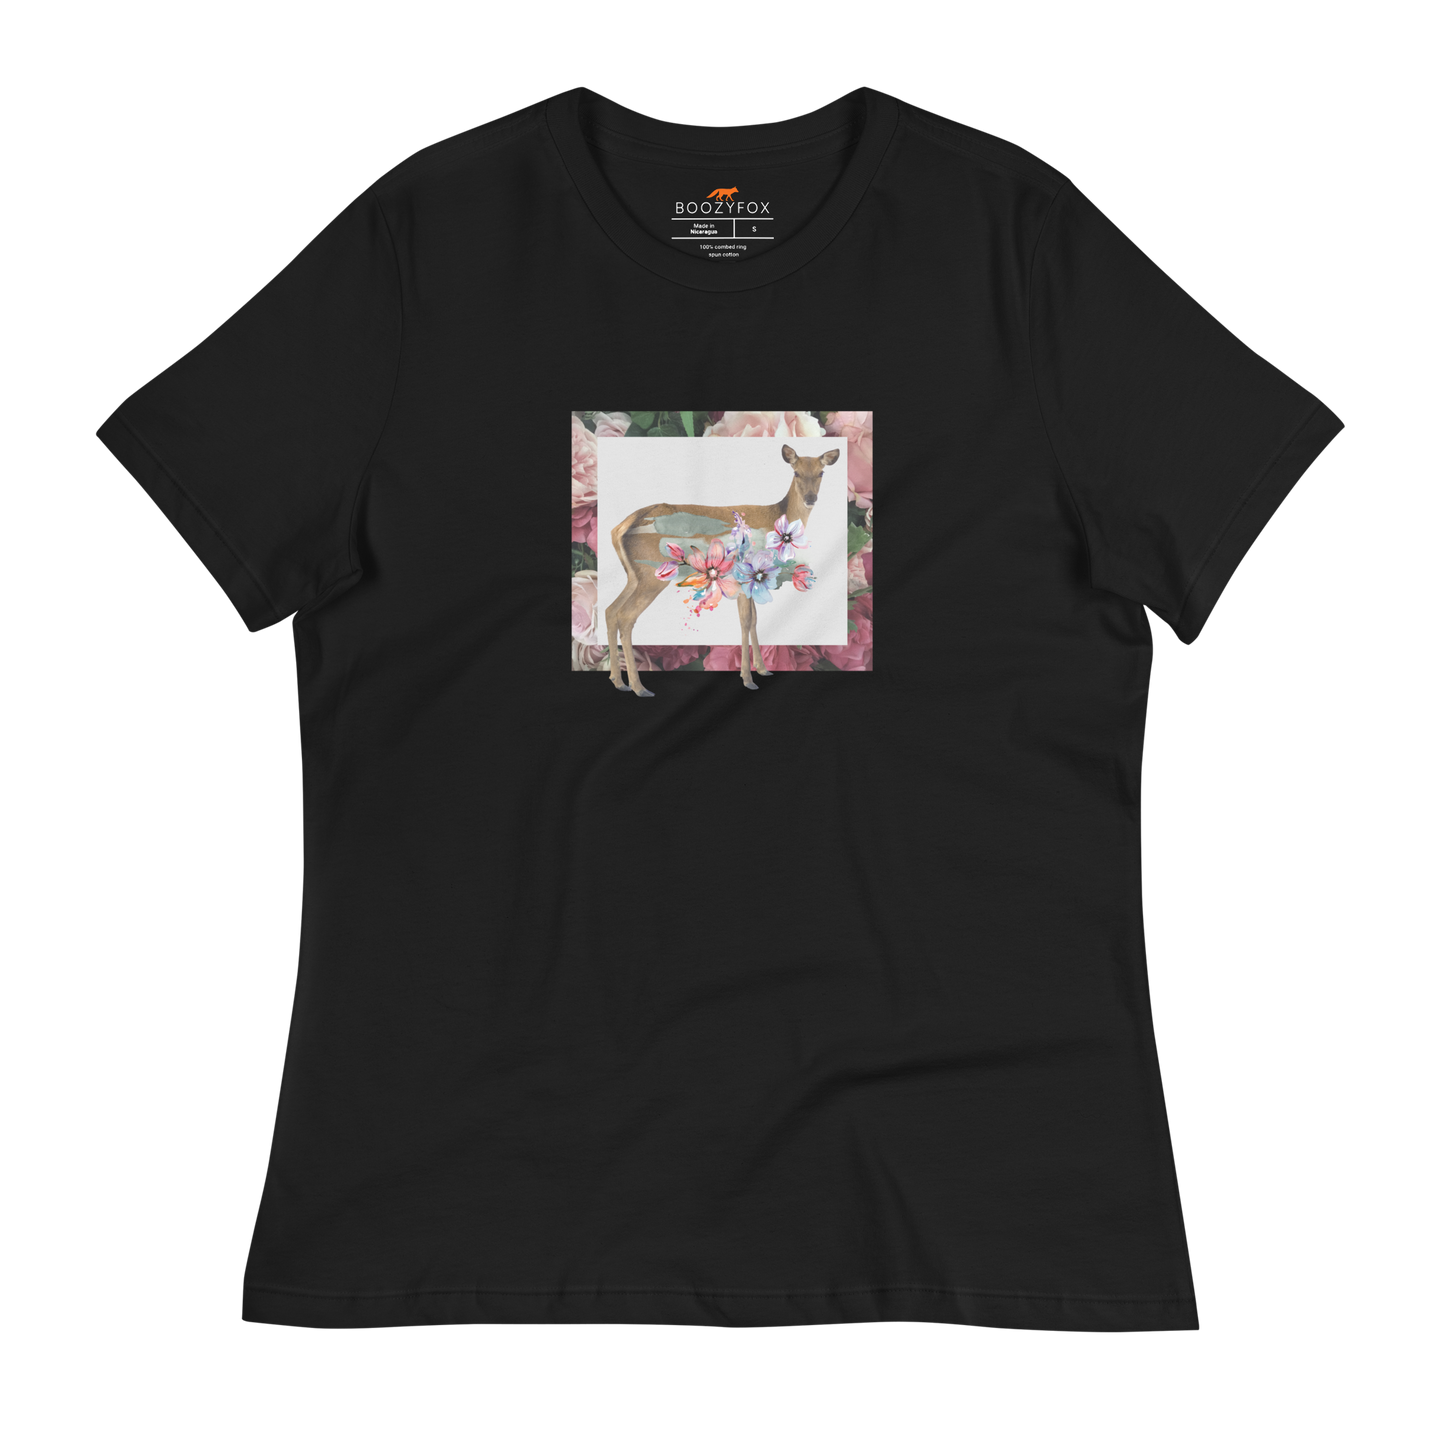 Women's relaxed black Deer t-shirt featuring a captivating Floral Deer graphic on the chest - Women's Graphic Deer Tees - Boozy Fox